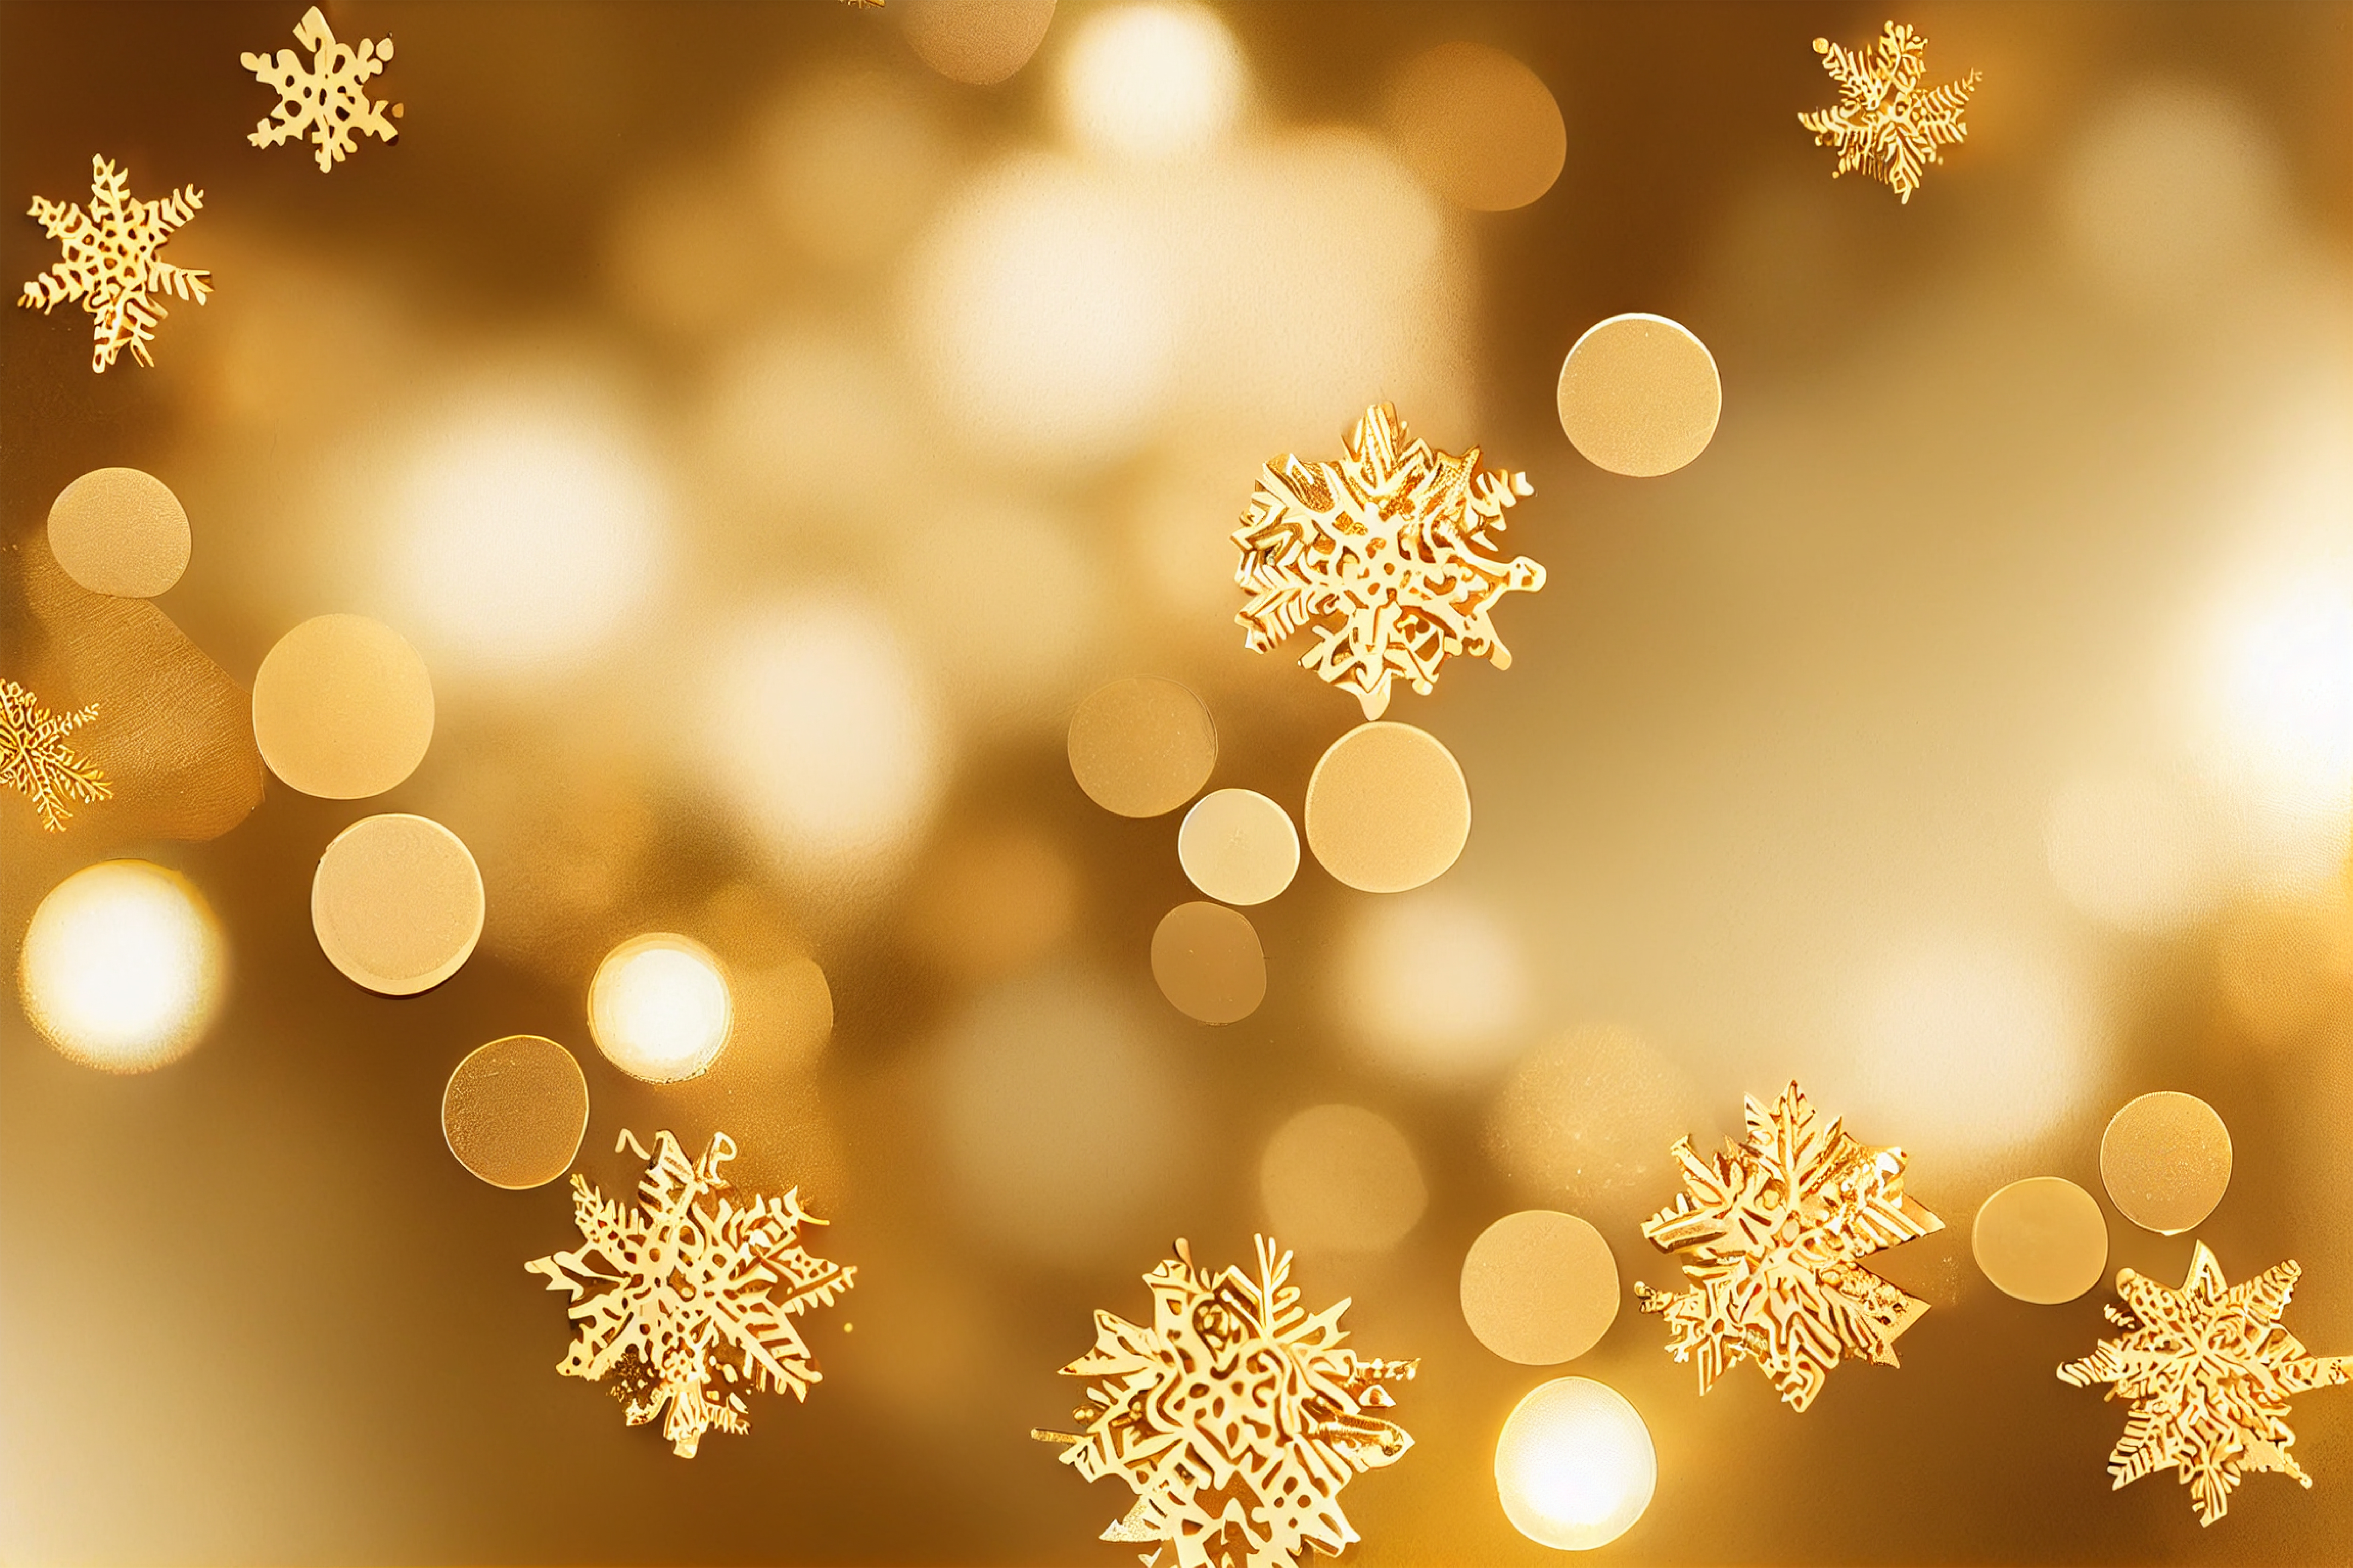 Details 100 gold christmas background